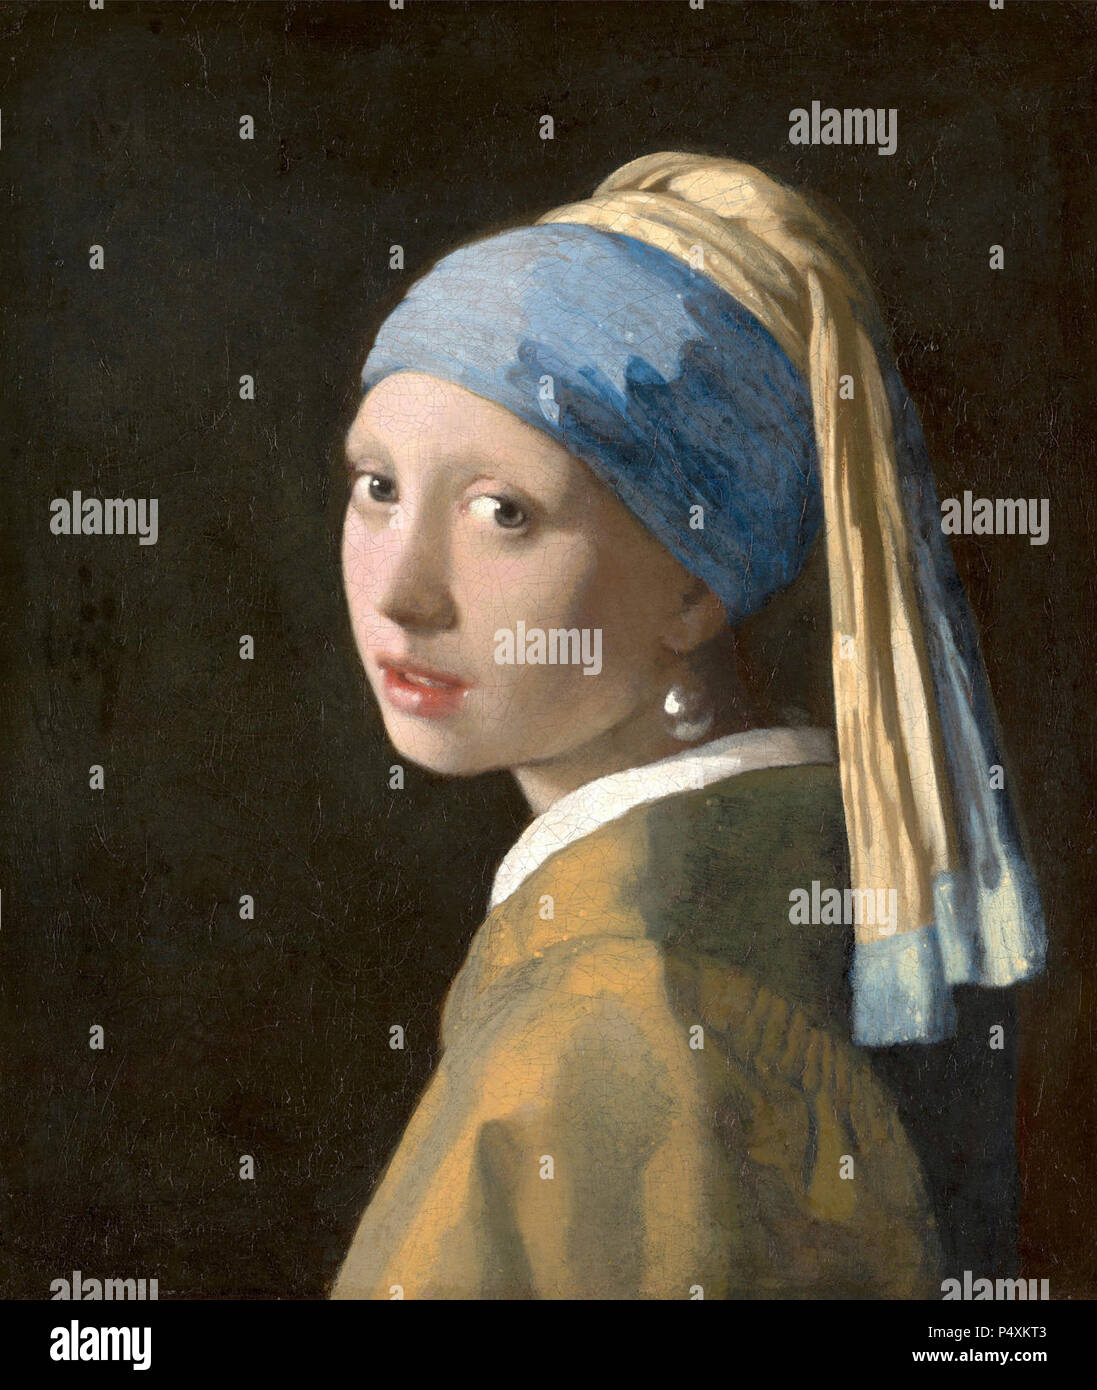 1665 Girl with a Pearl Earring. Stock Photo